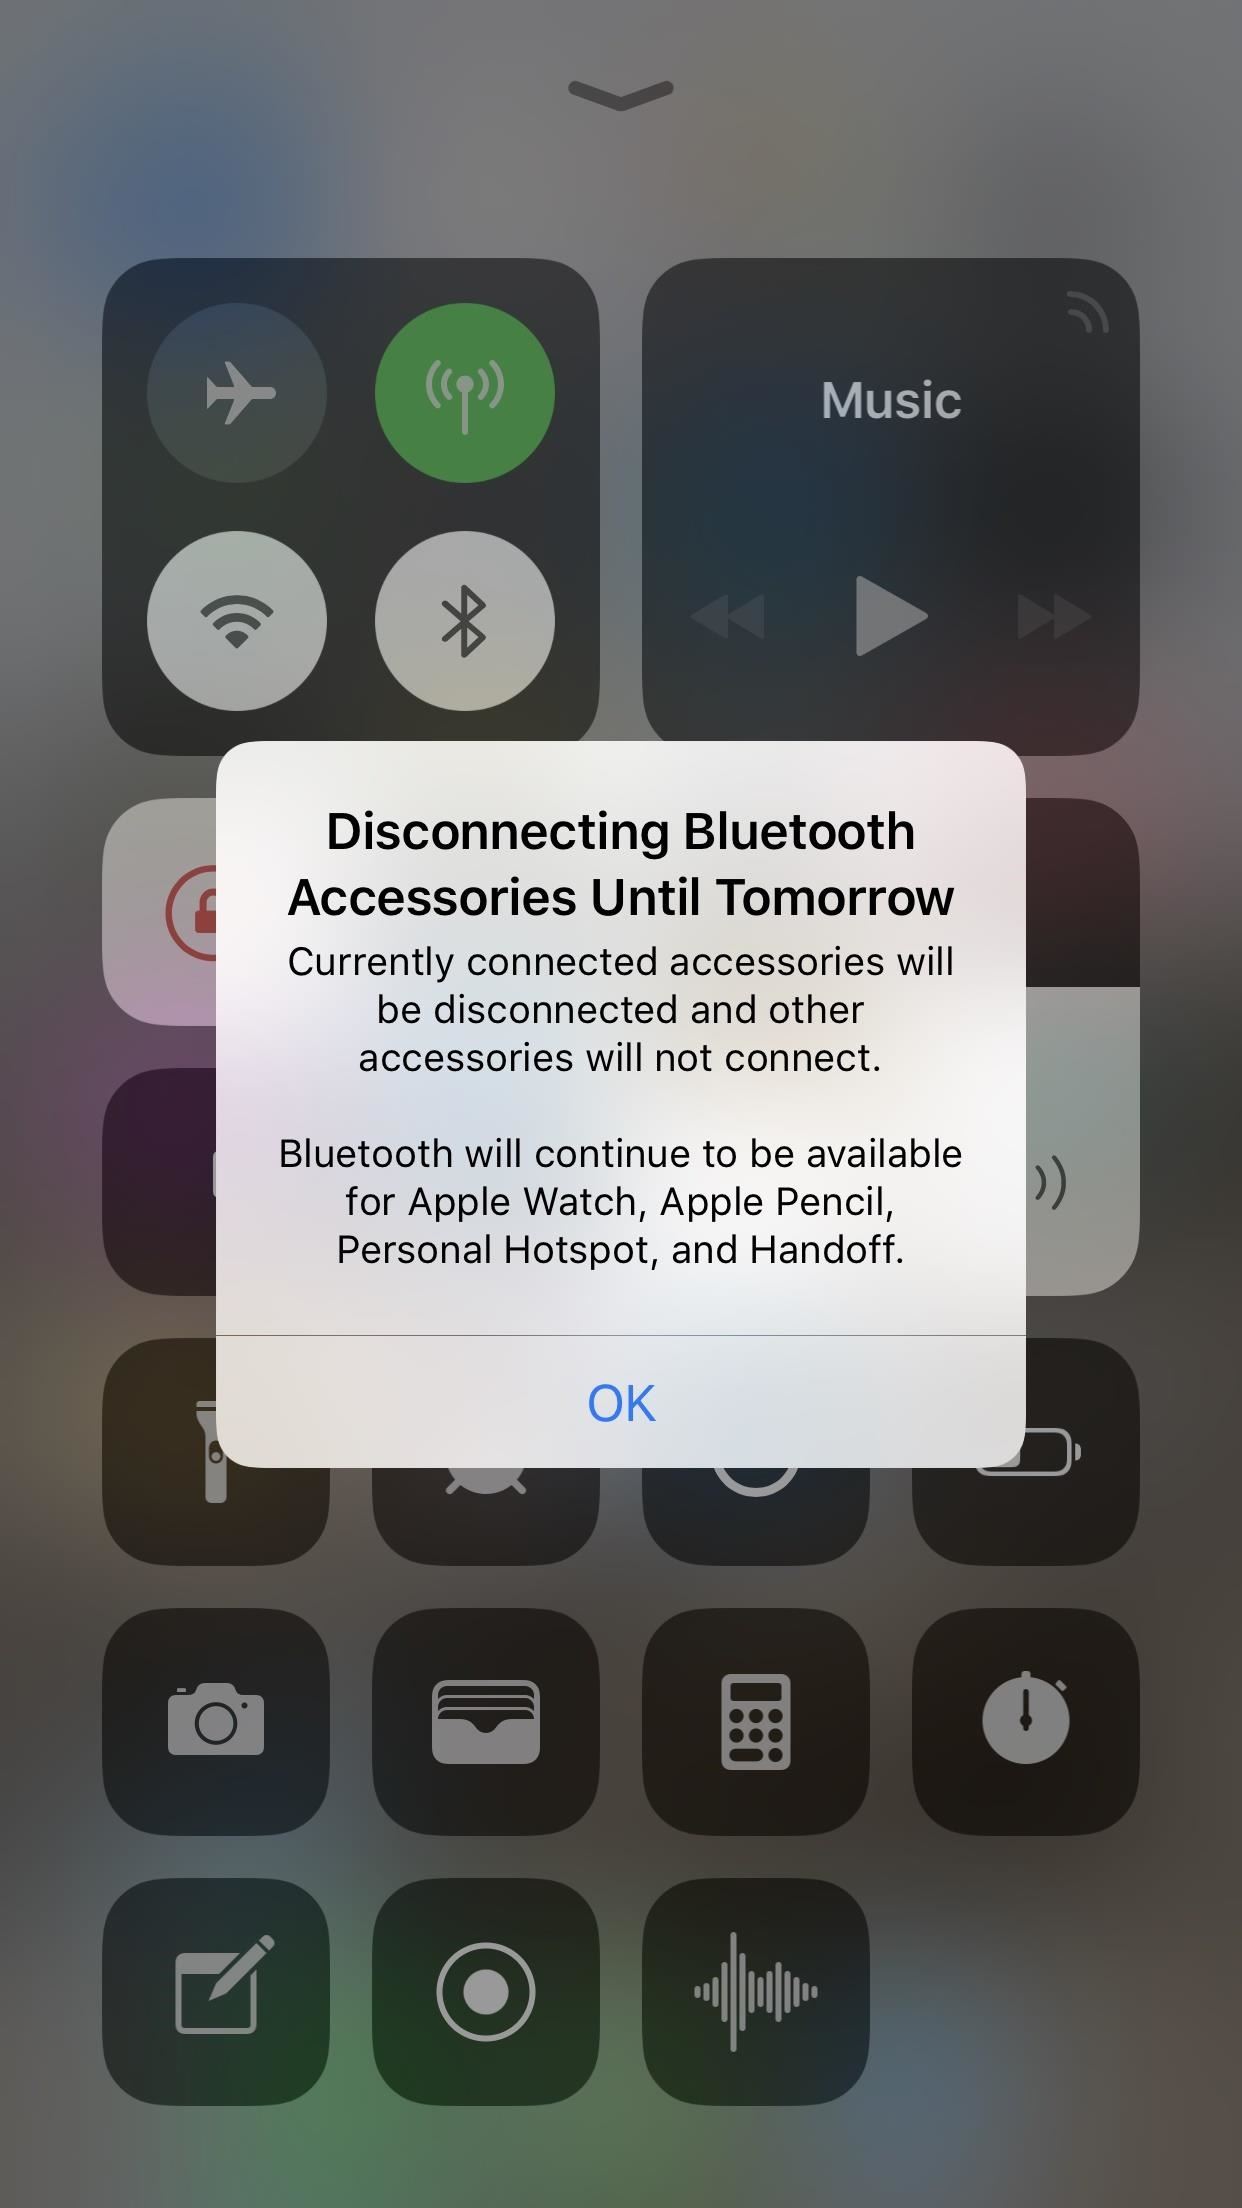 iOS 11.2 Beta 3 Released, Includes Pop-Up Alerts for Wi-Fi & Bluetooth Controls, New Control Center Bar